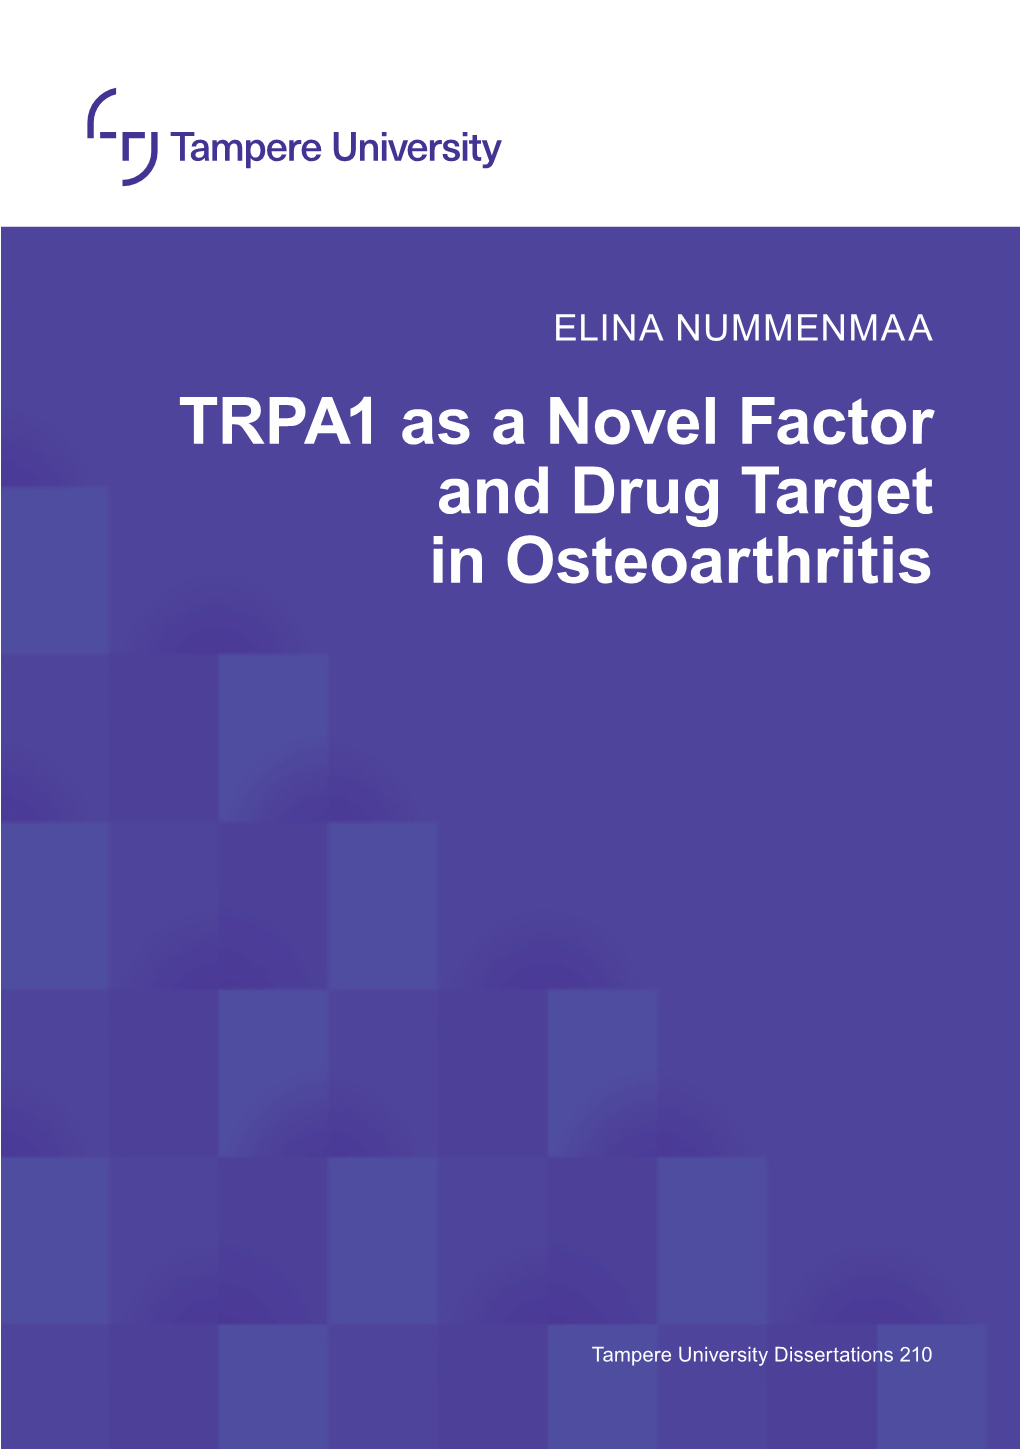 TRPA1 As a Novel Factor and Drug Target in Osteoarthritis